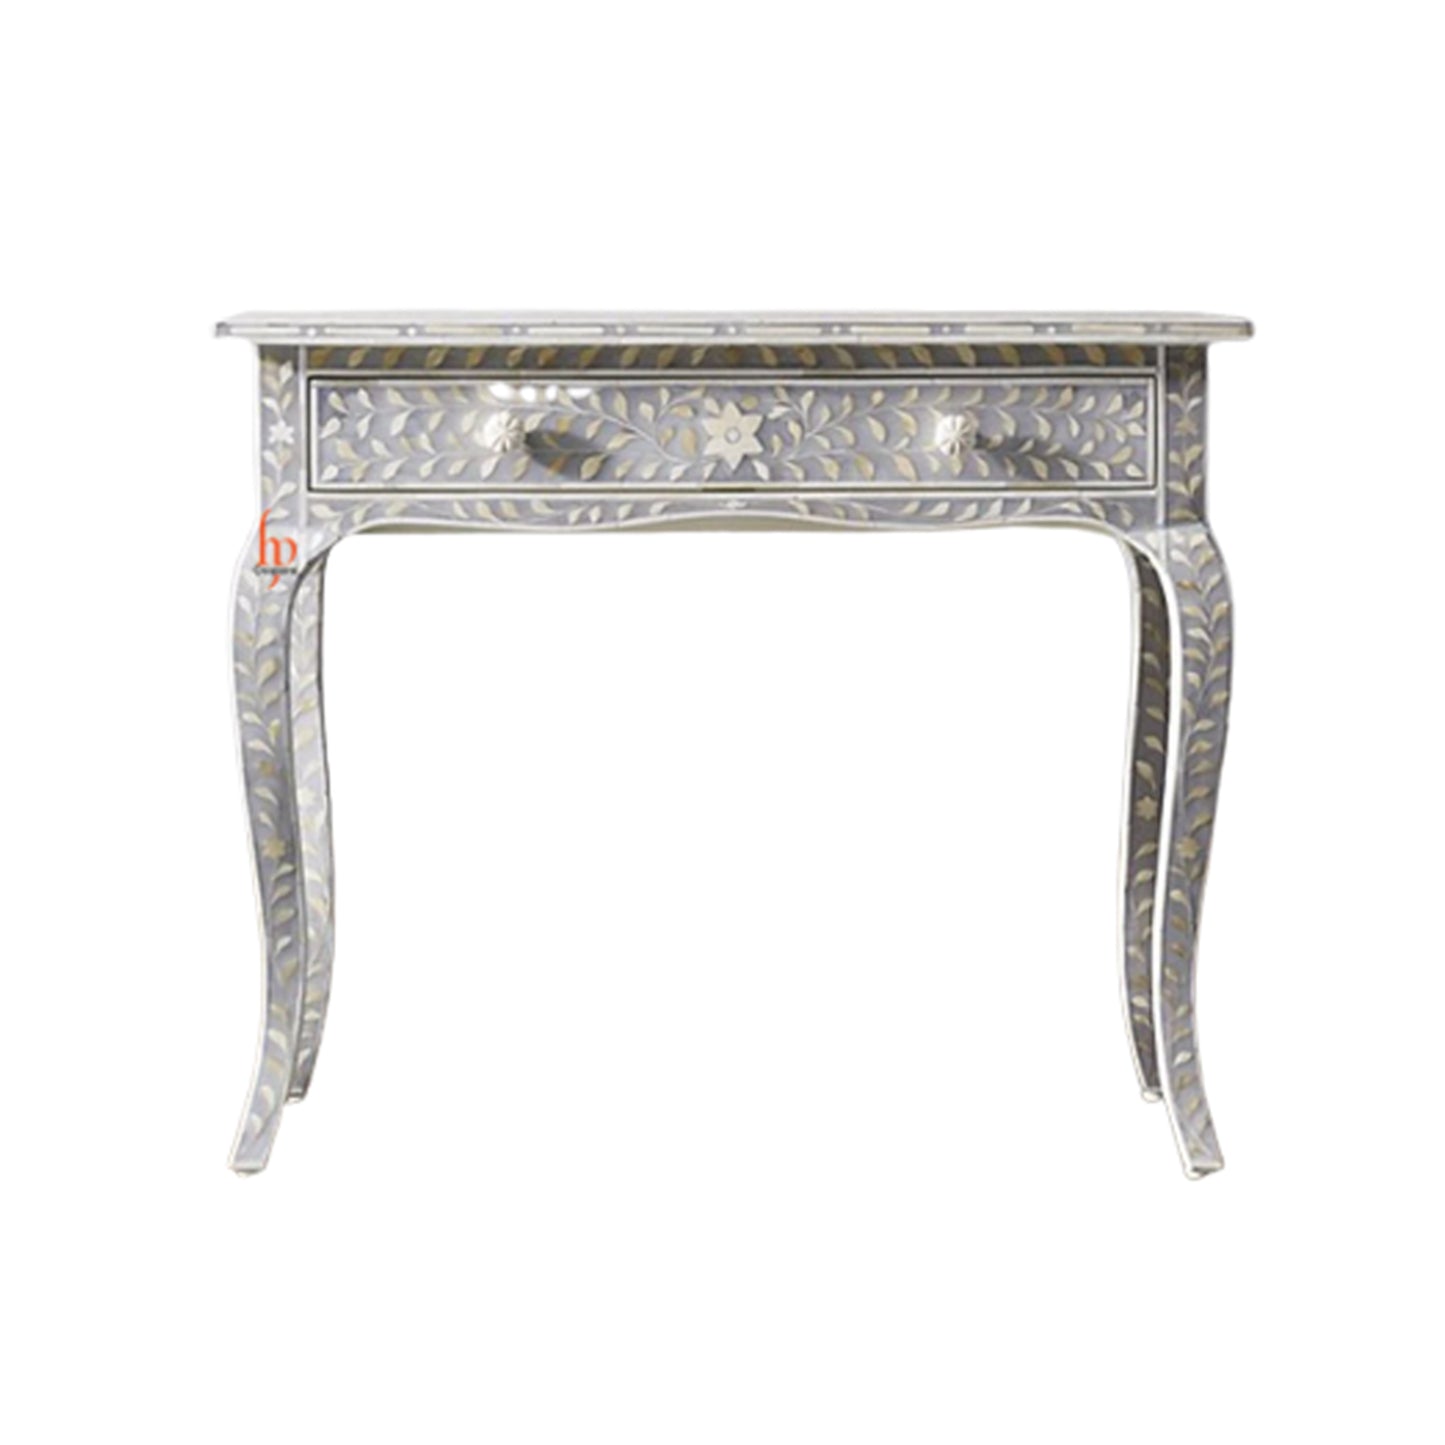 Handmade Bone Inlay Console with One-Drawer Beautifully Crafted Floral Design Best Home Decor Furniture